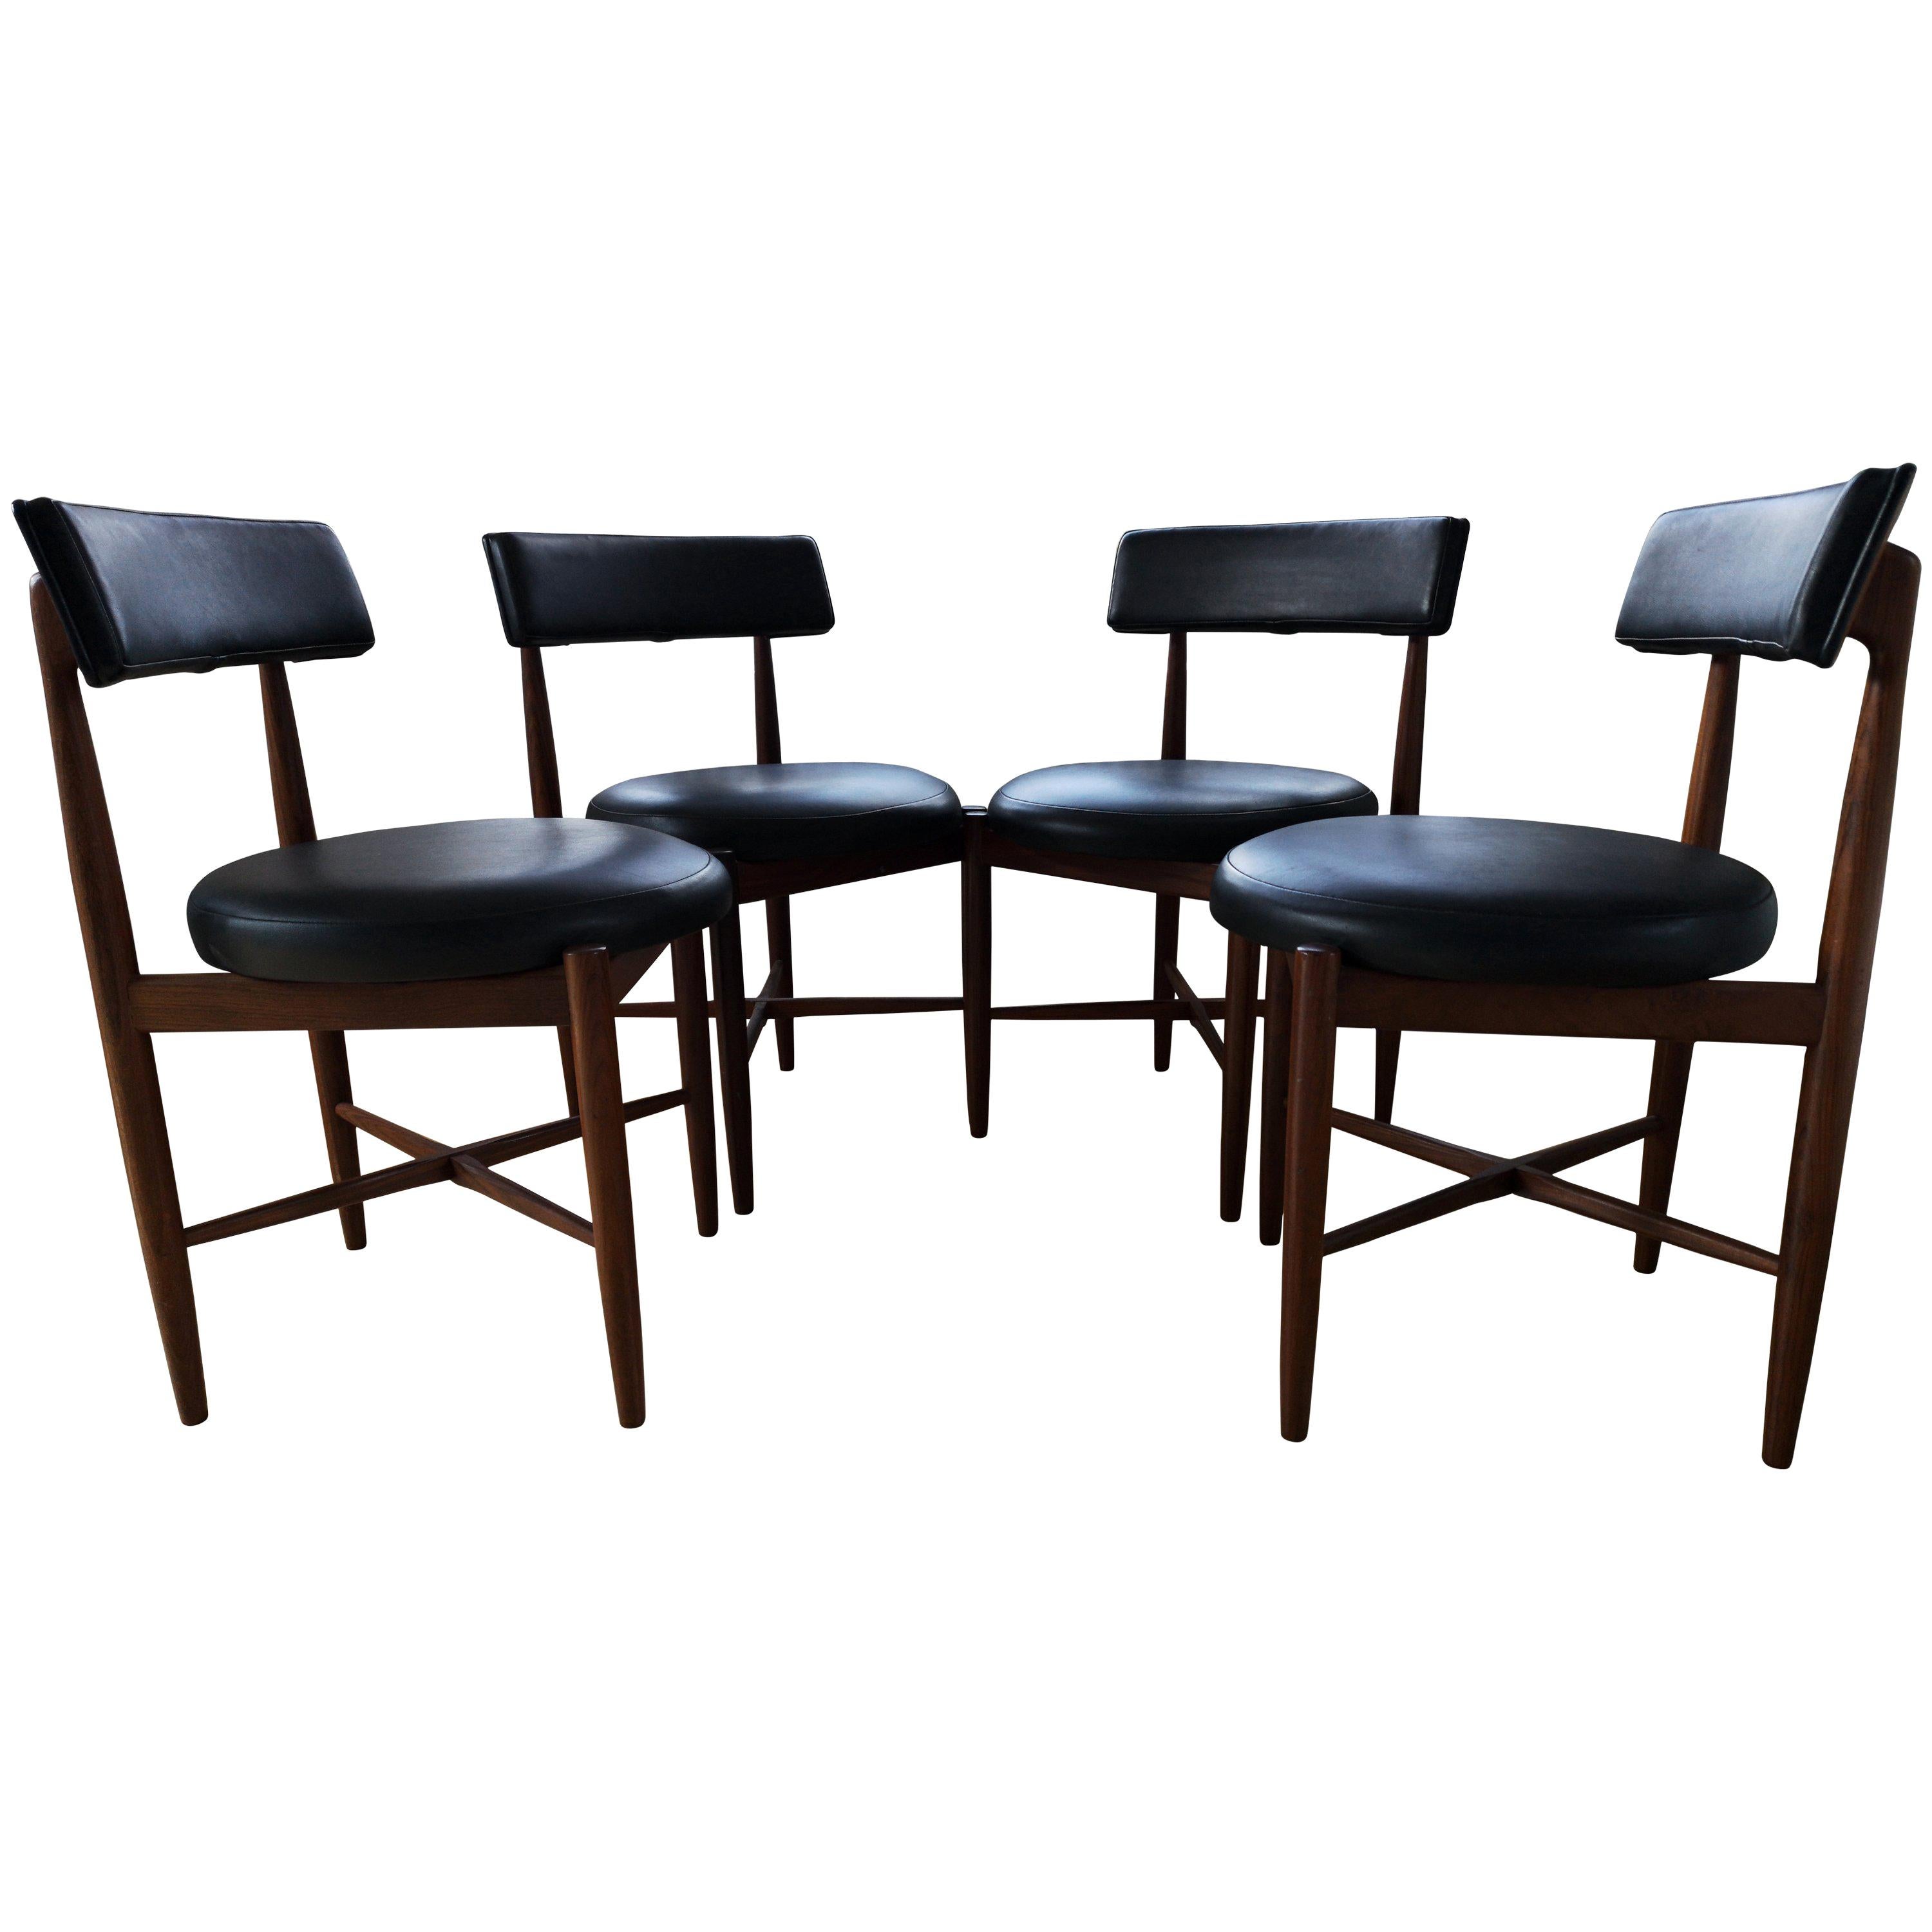 Midcentury Teak and Black Vinyl Dining Chairs by Victor Wilkins for G-Plan